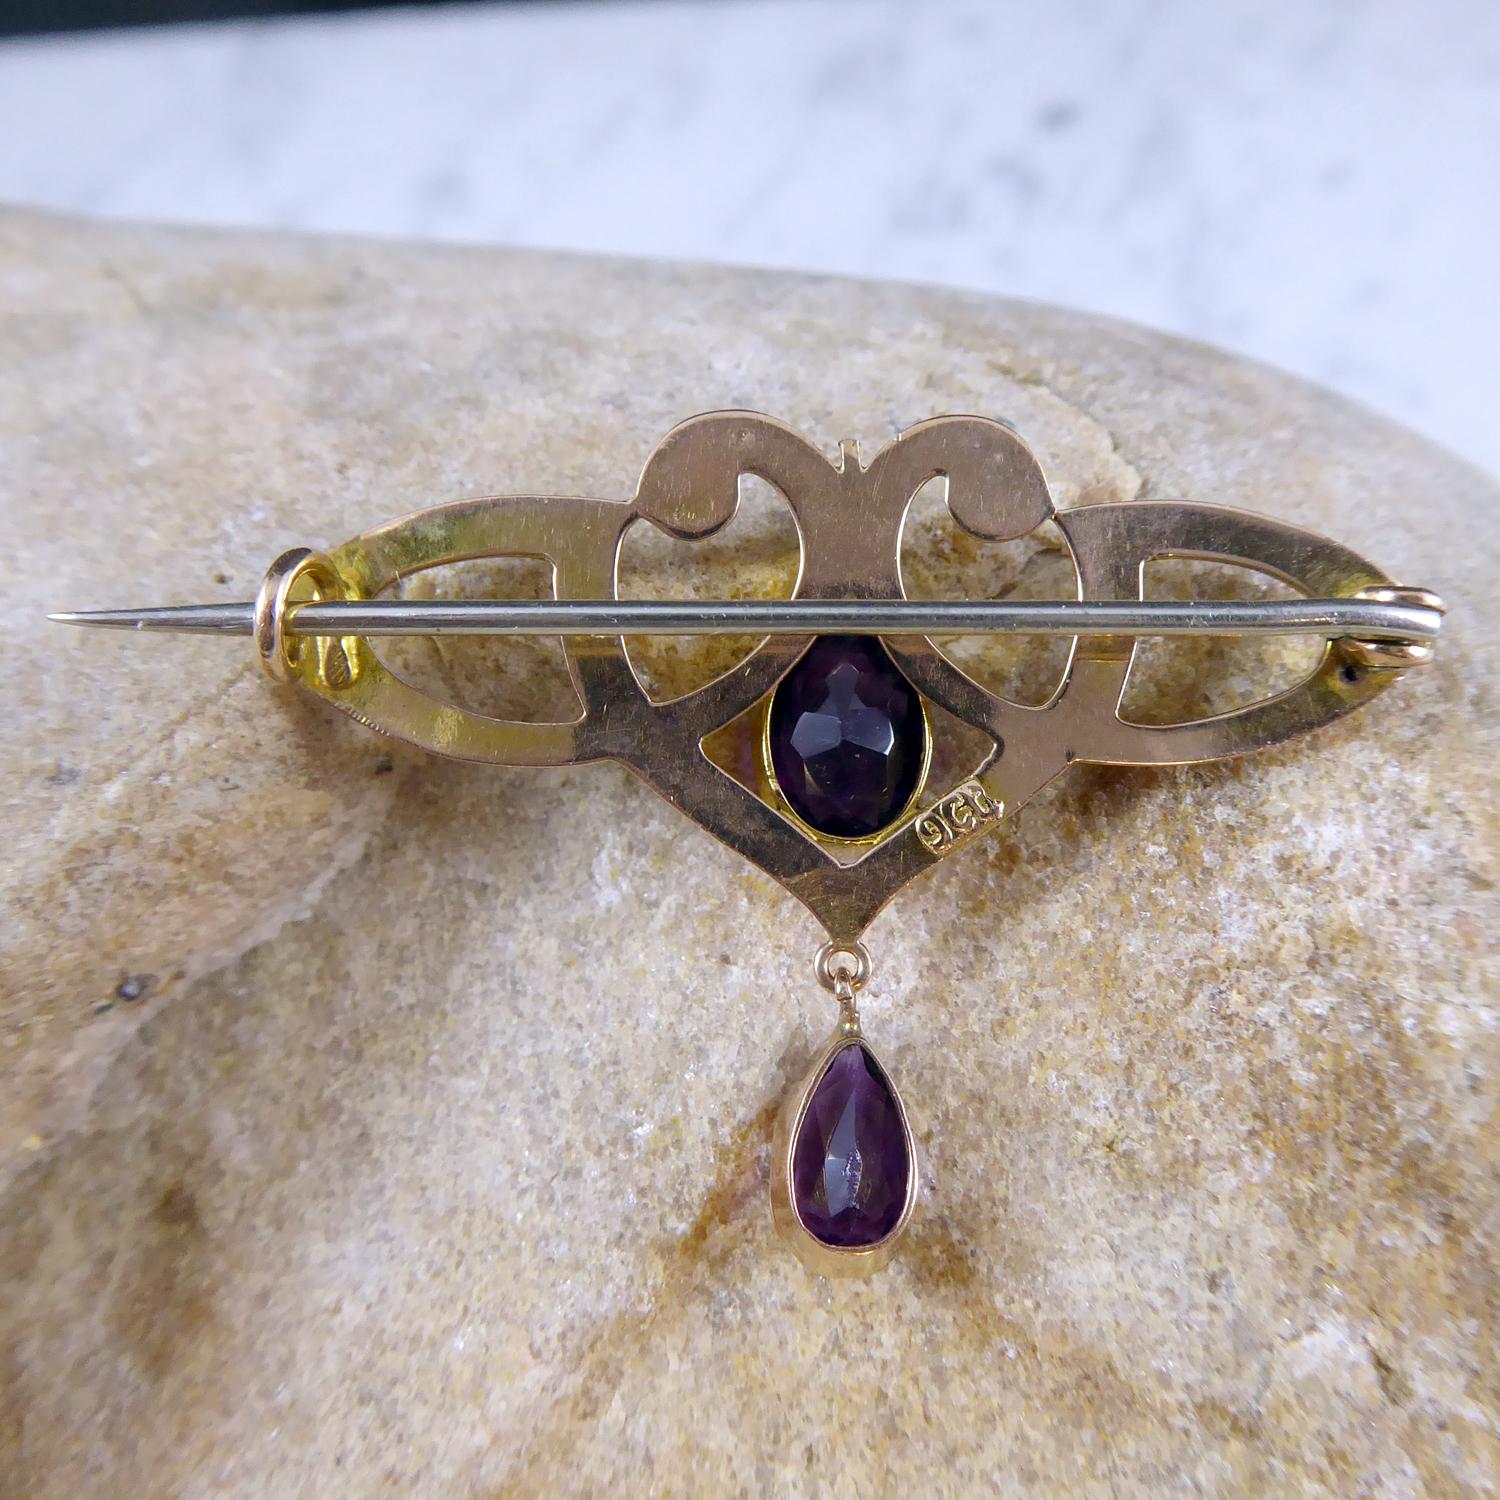 Antique Art Nouveau Amethyst and Rose Gold Brooch 1